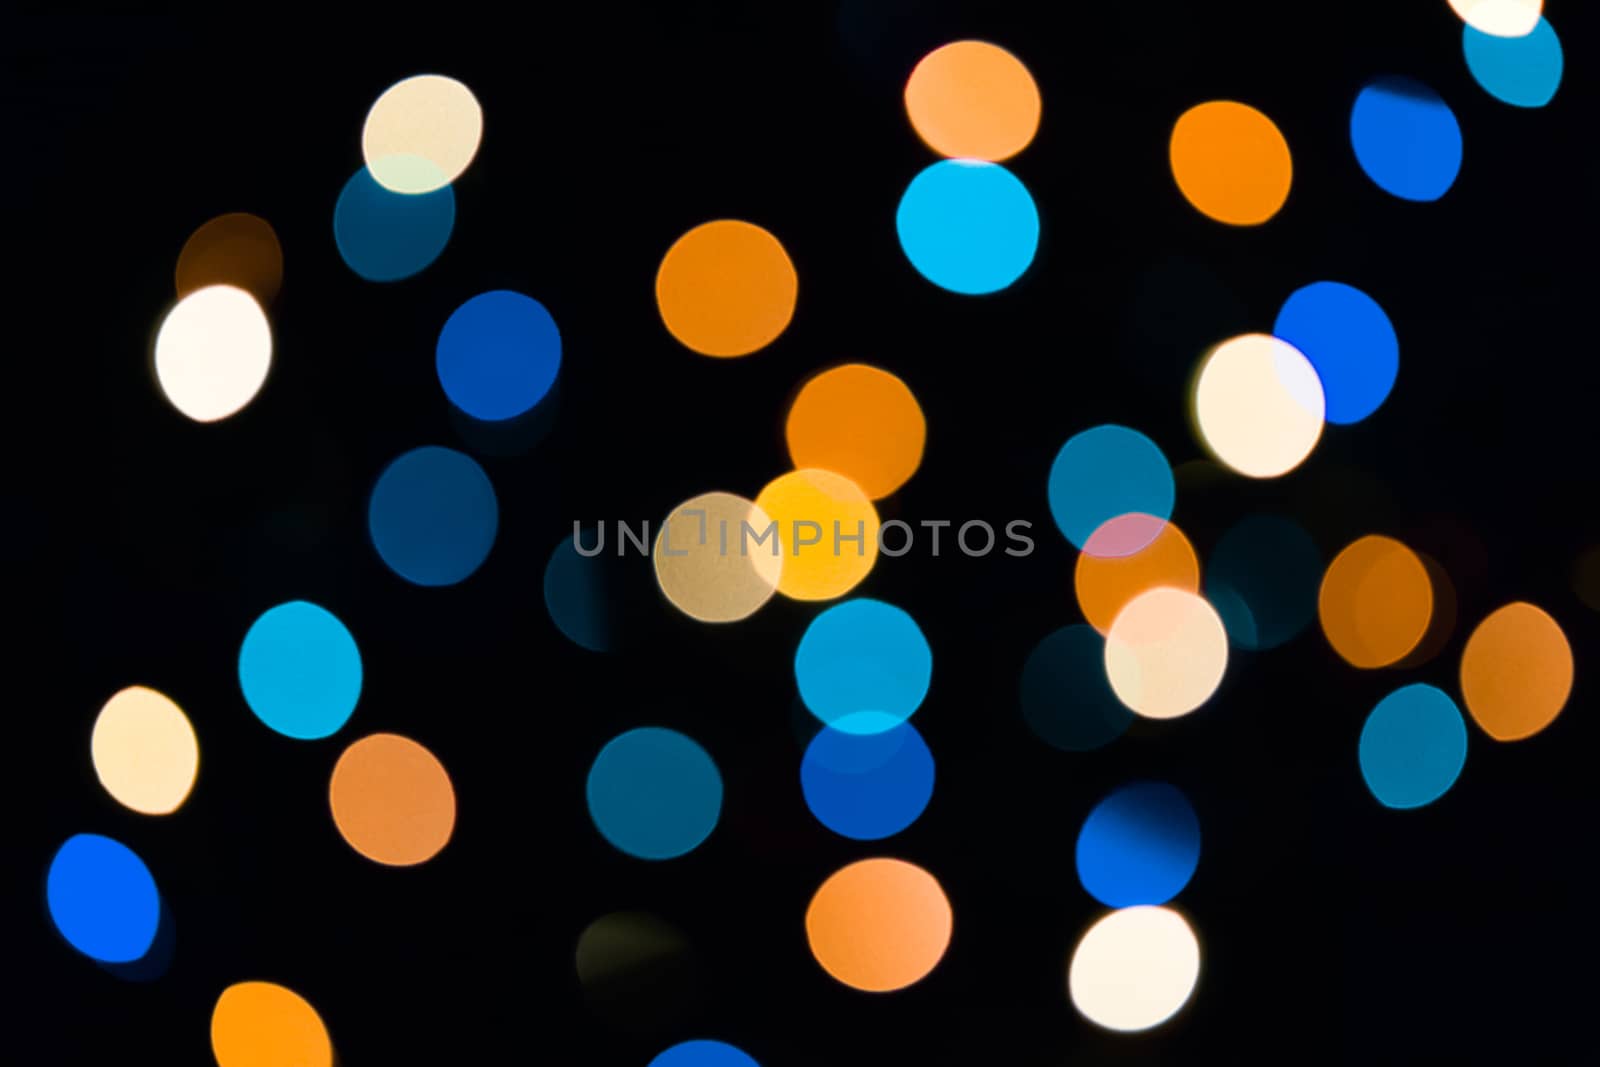 Natural bokeh texture on dark background by only4denn